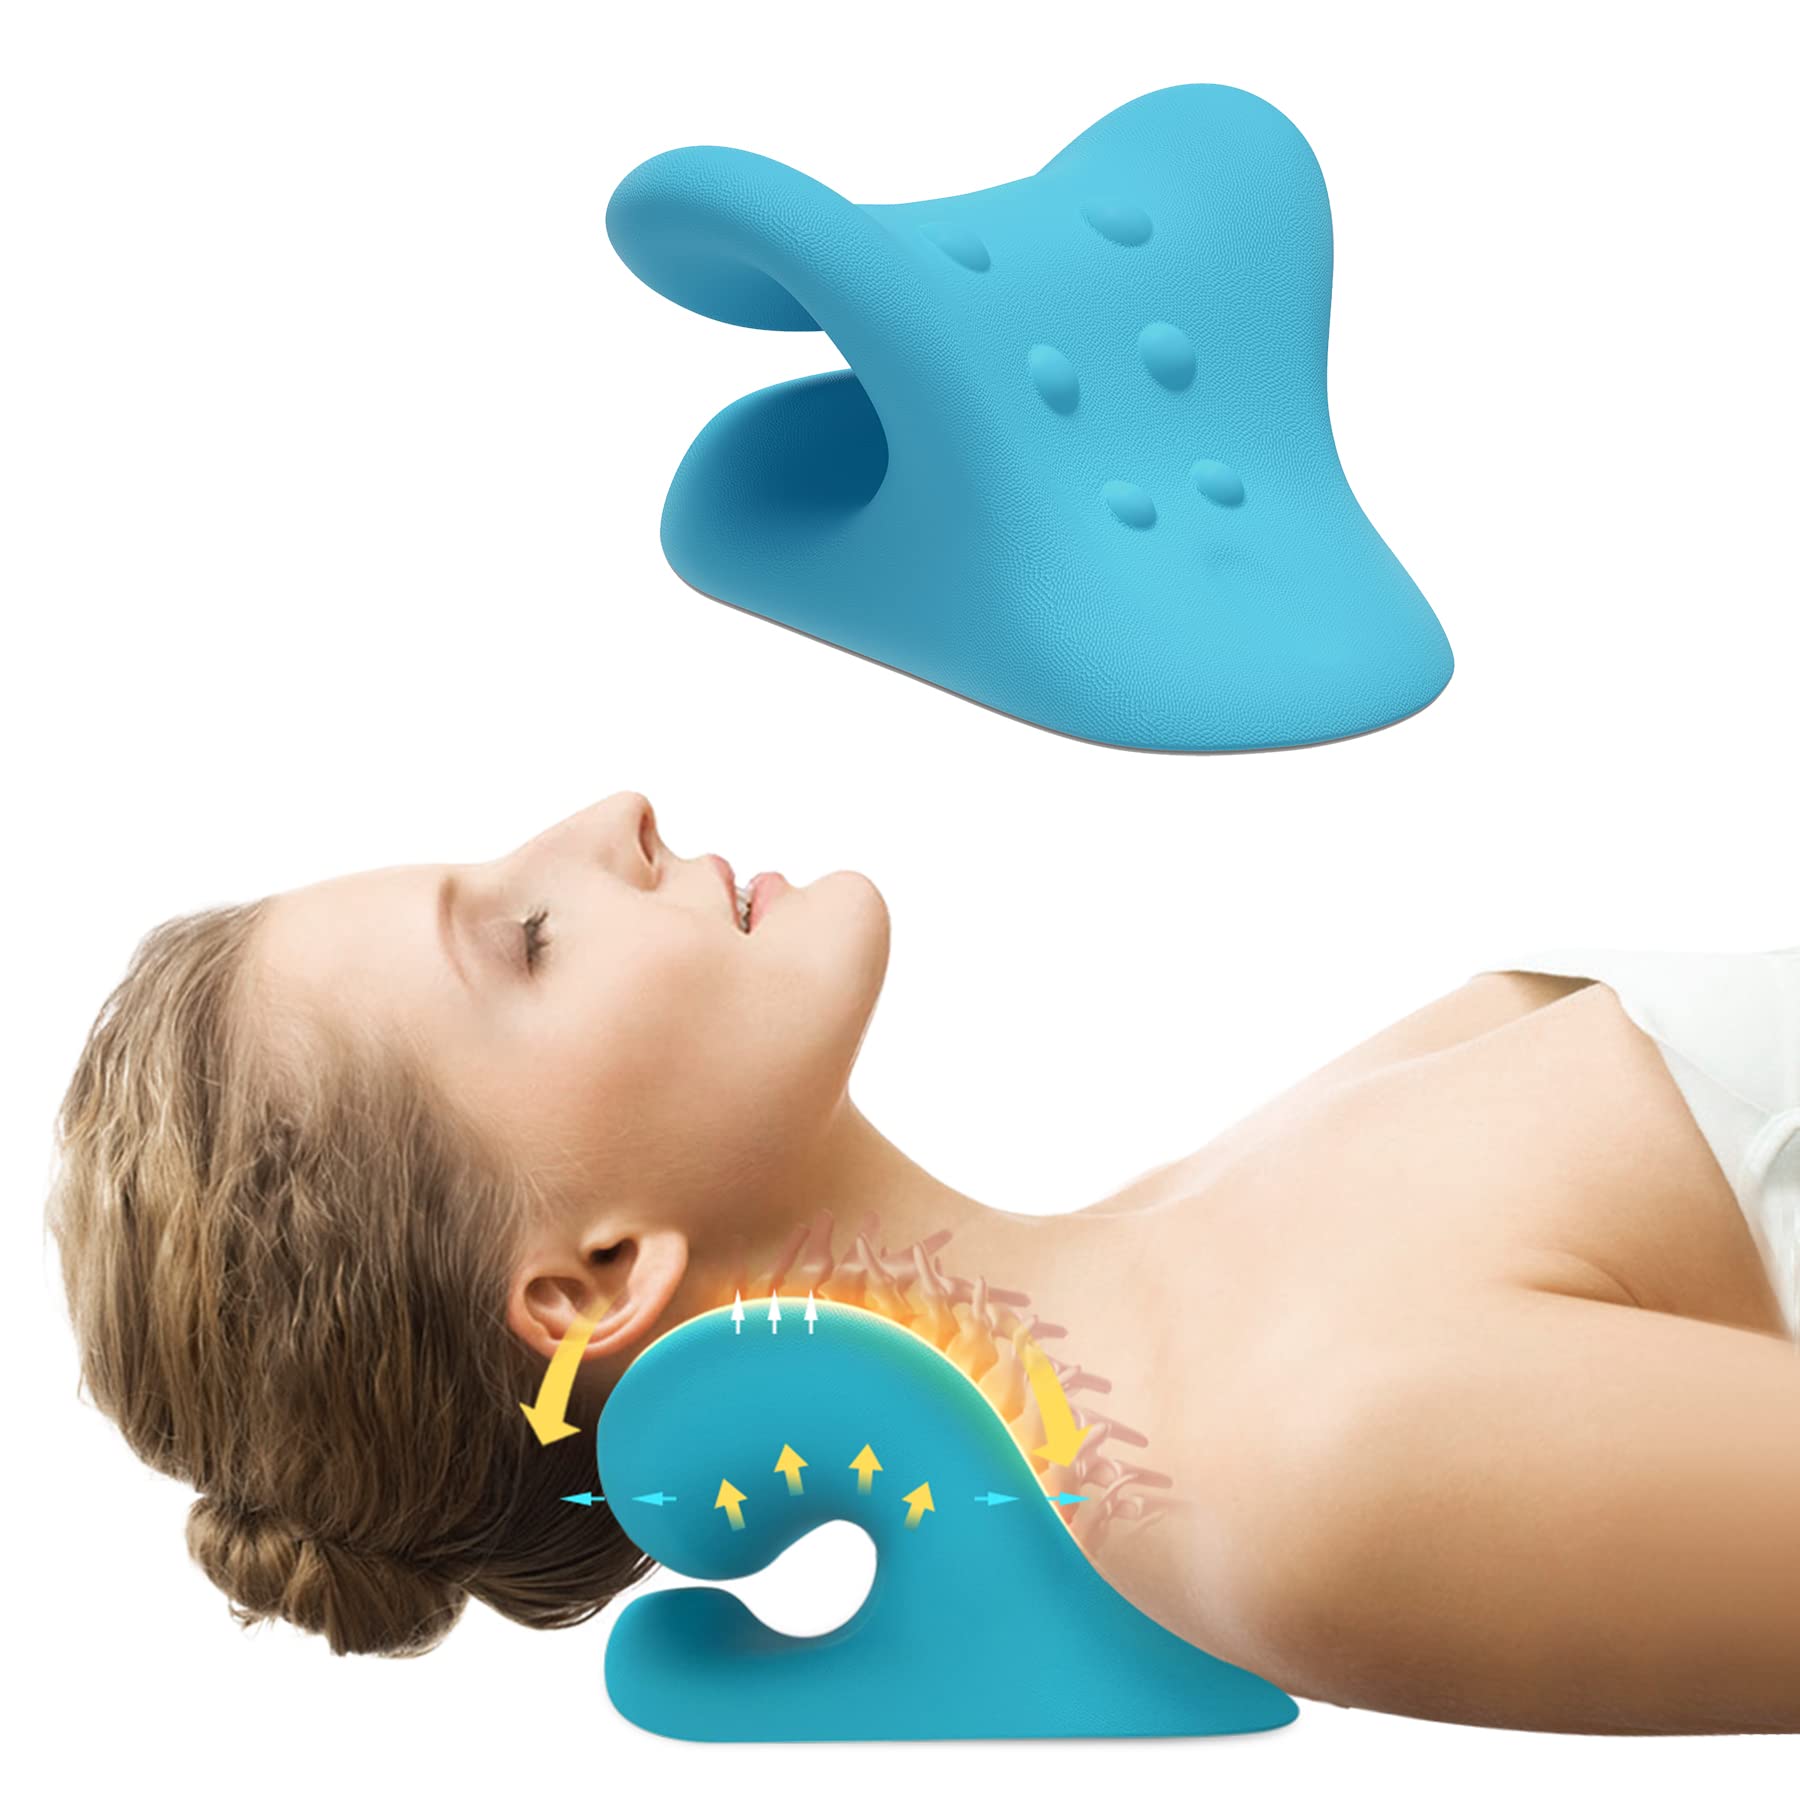 Neck and Shoulder Relaxer, Neck Stretcher for Neck Pain Relief, Cervical  Traction Device for TMJ Pain Relief and Cervical Spine Alignment,  Chiropractic Pillow Neck Stretcher, Blue 